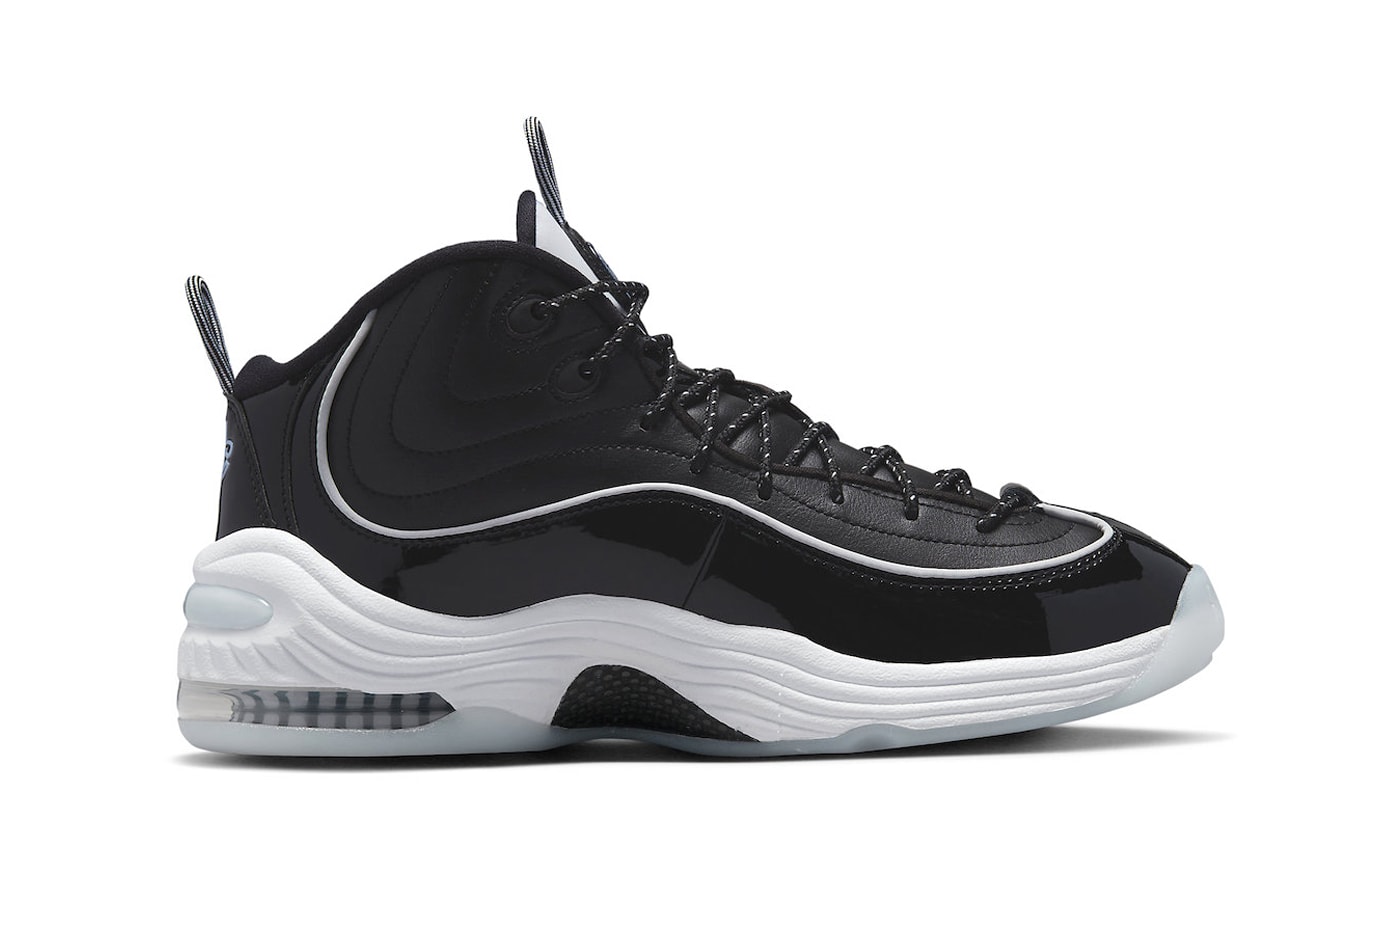 Nike Air Penny 2 Arrives in Classic "Black Patent" DV0817-001 Black/Multi Color-White-Football Grey stussy penny hardaway basketball high tops vintage aesethetic 90s february 2023 release date